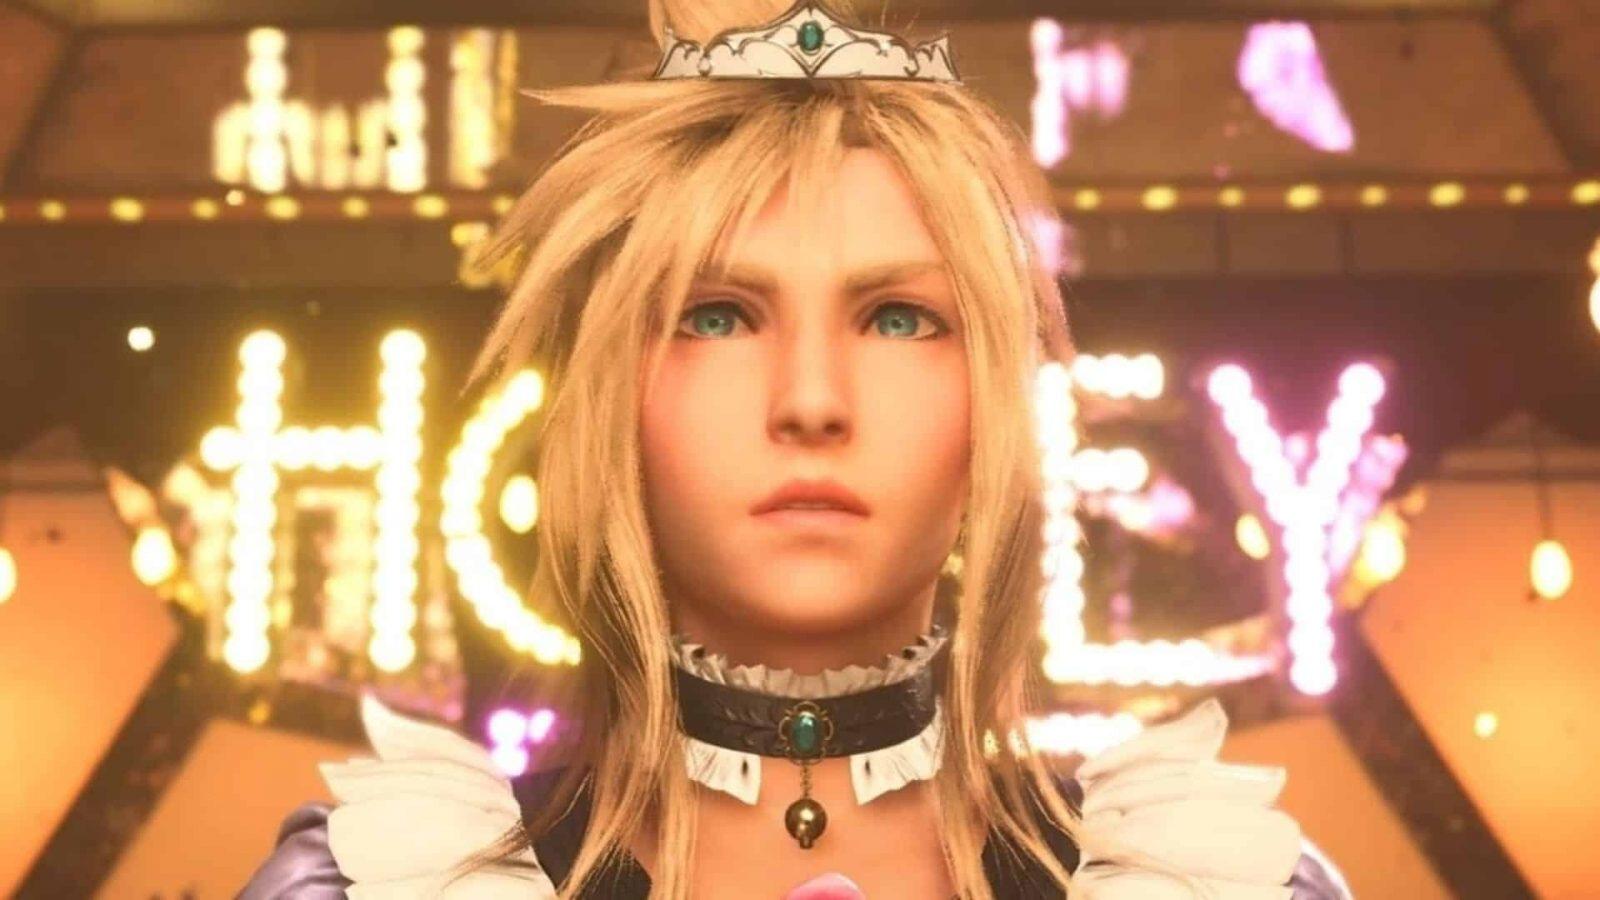 cloud strife dressed as woman in final fantasy 7